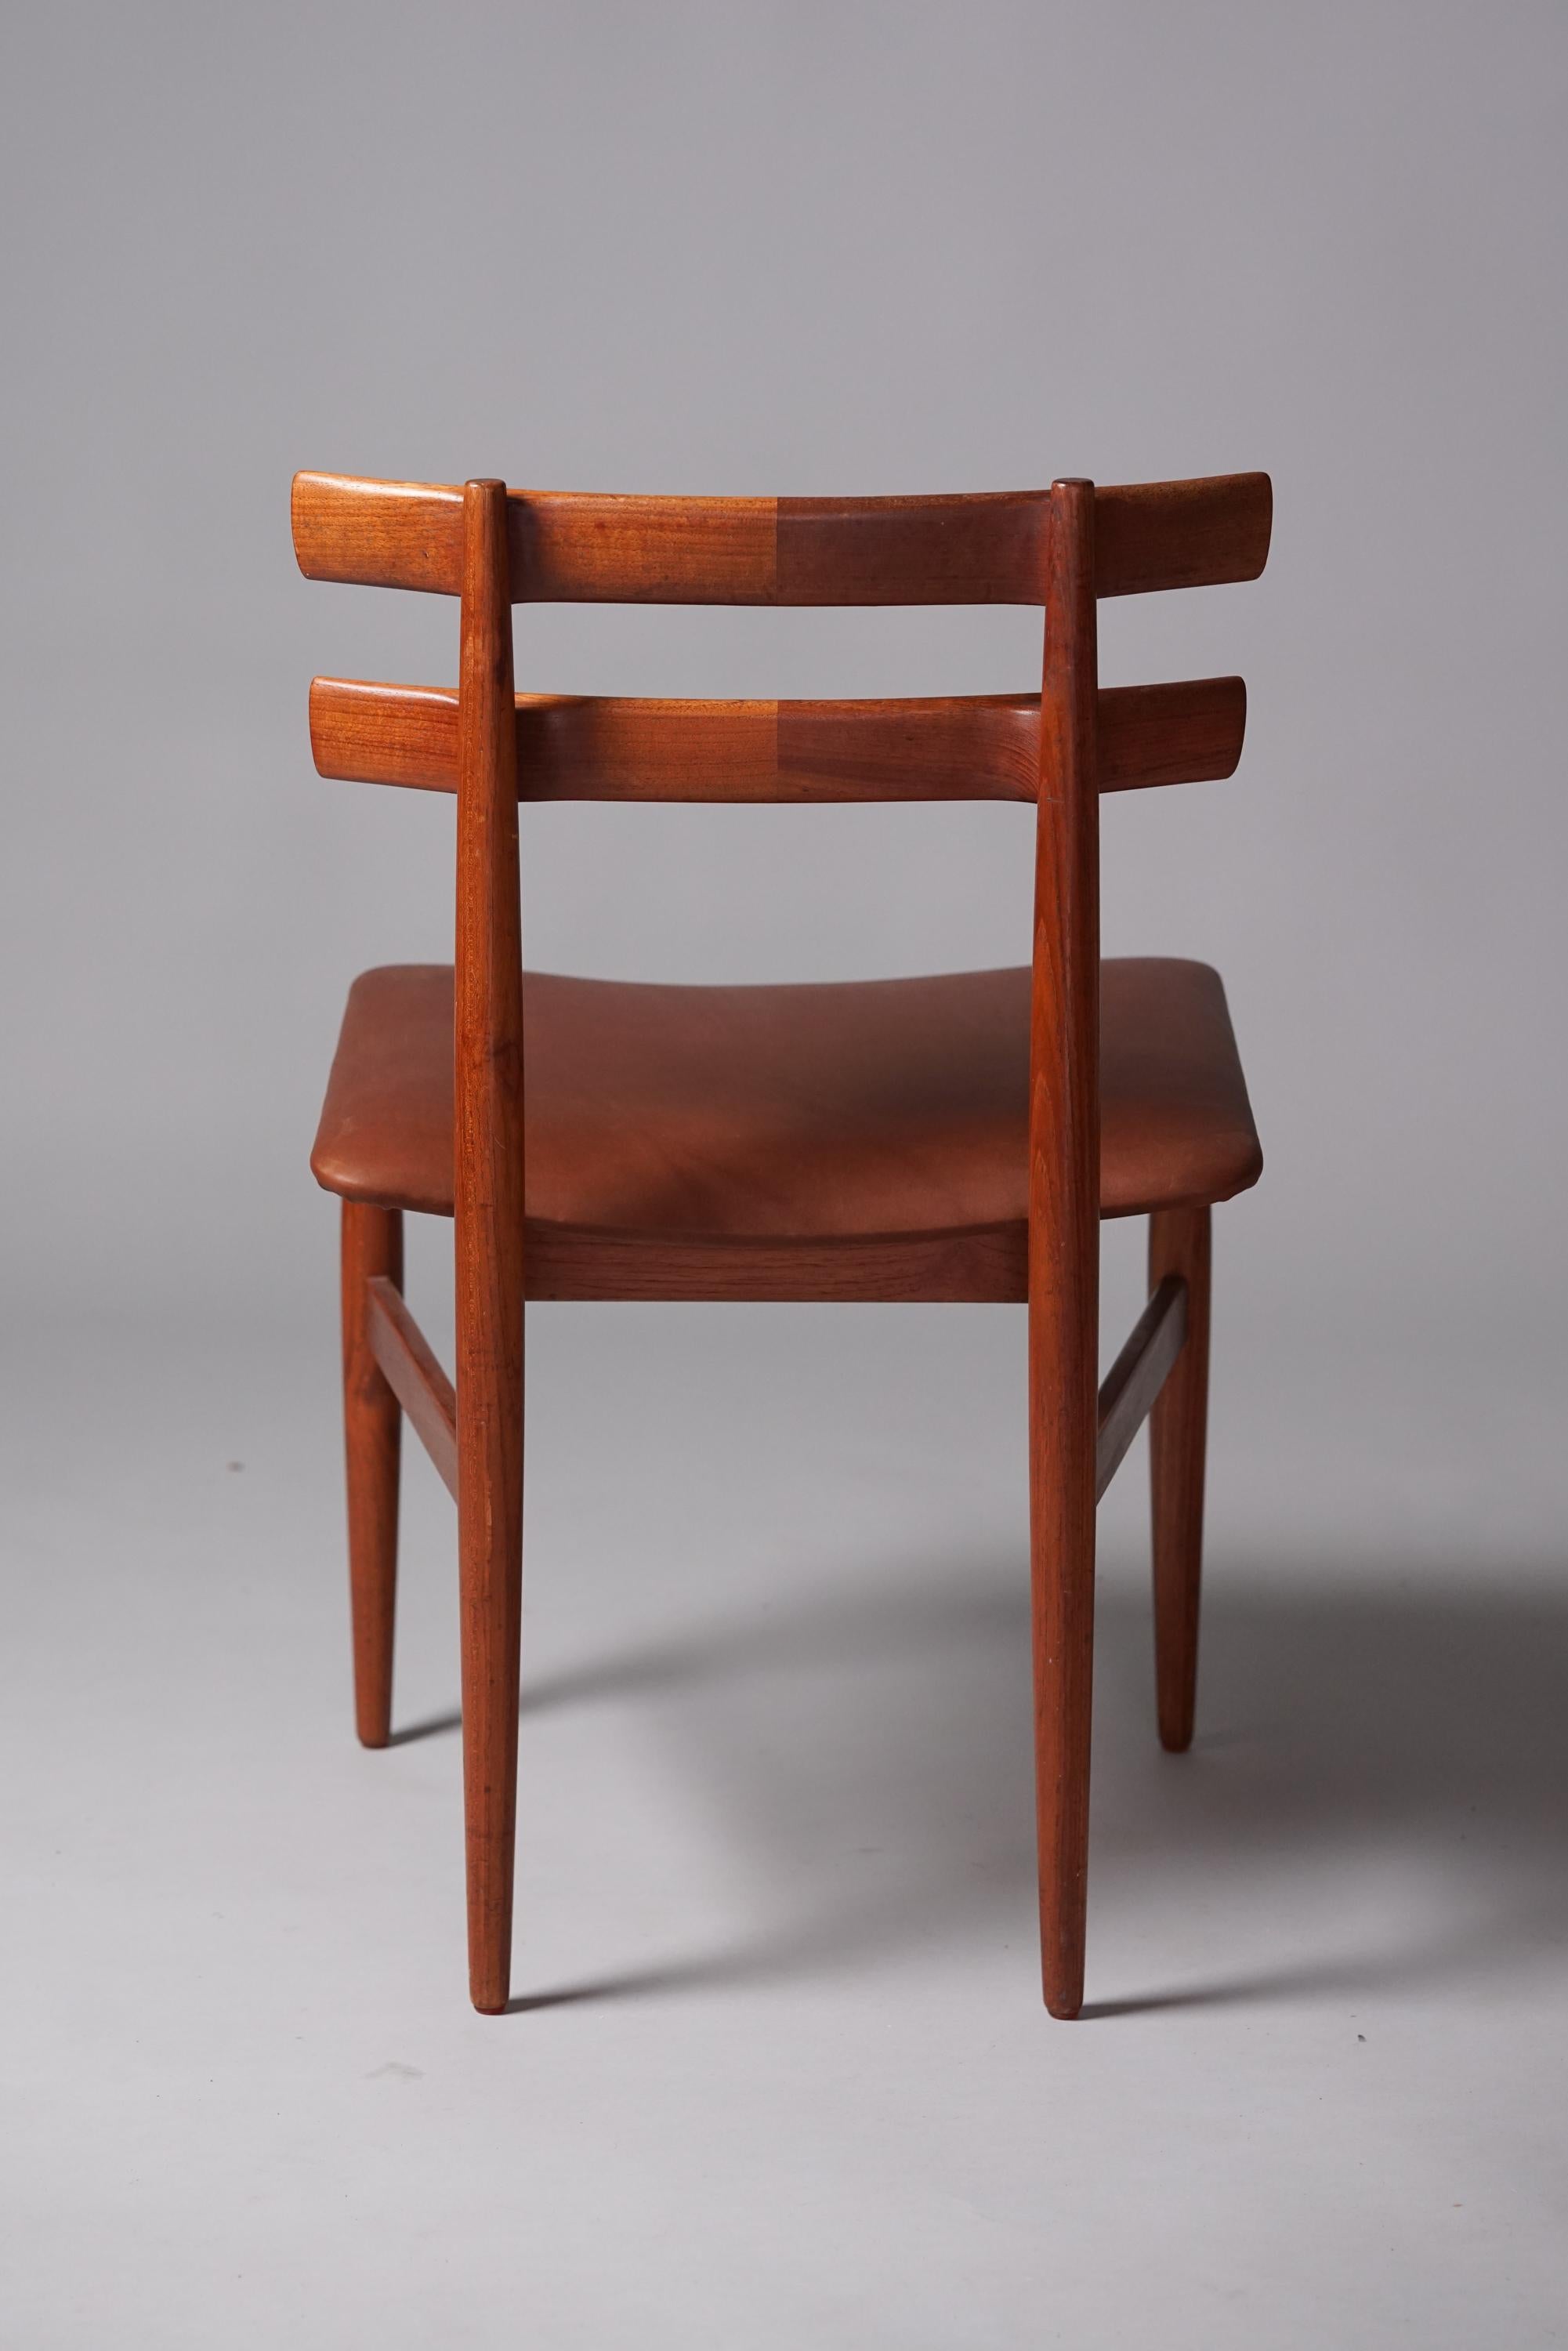 Set of Four Teak Chairs, Poul Hundevad, 1960s For Sale 5